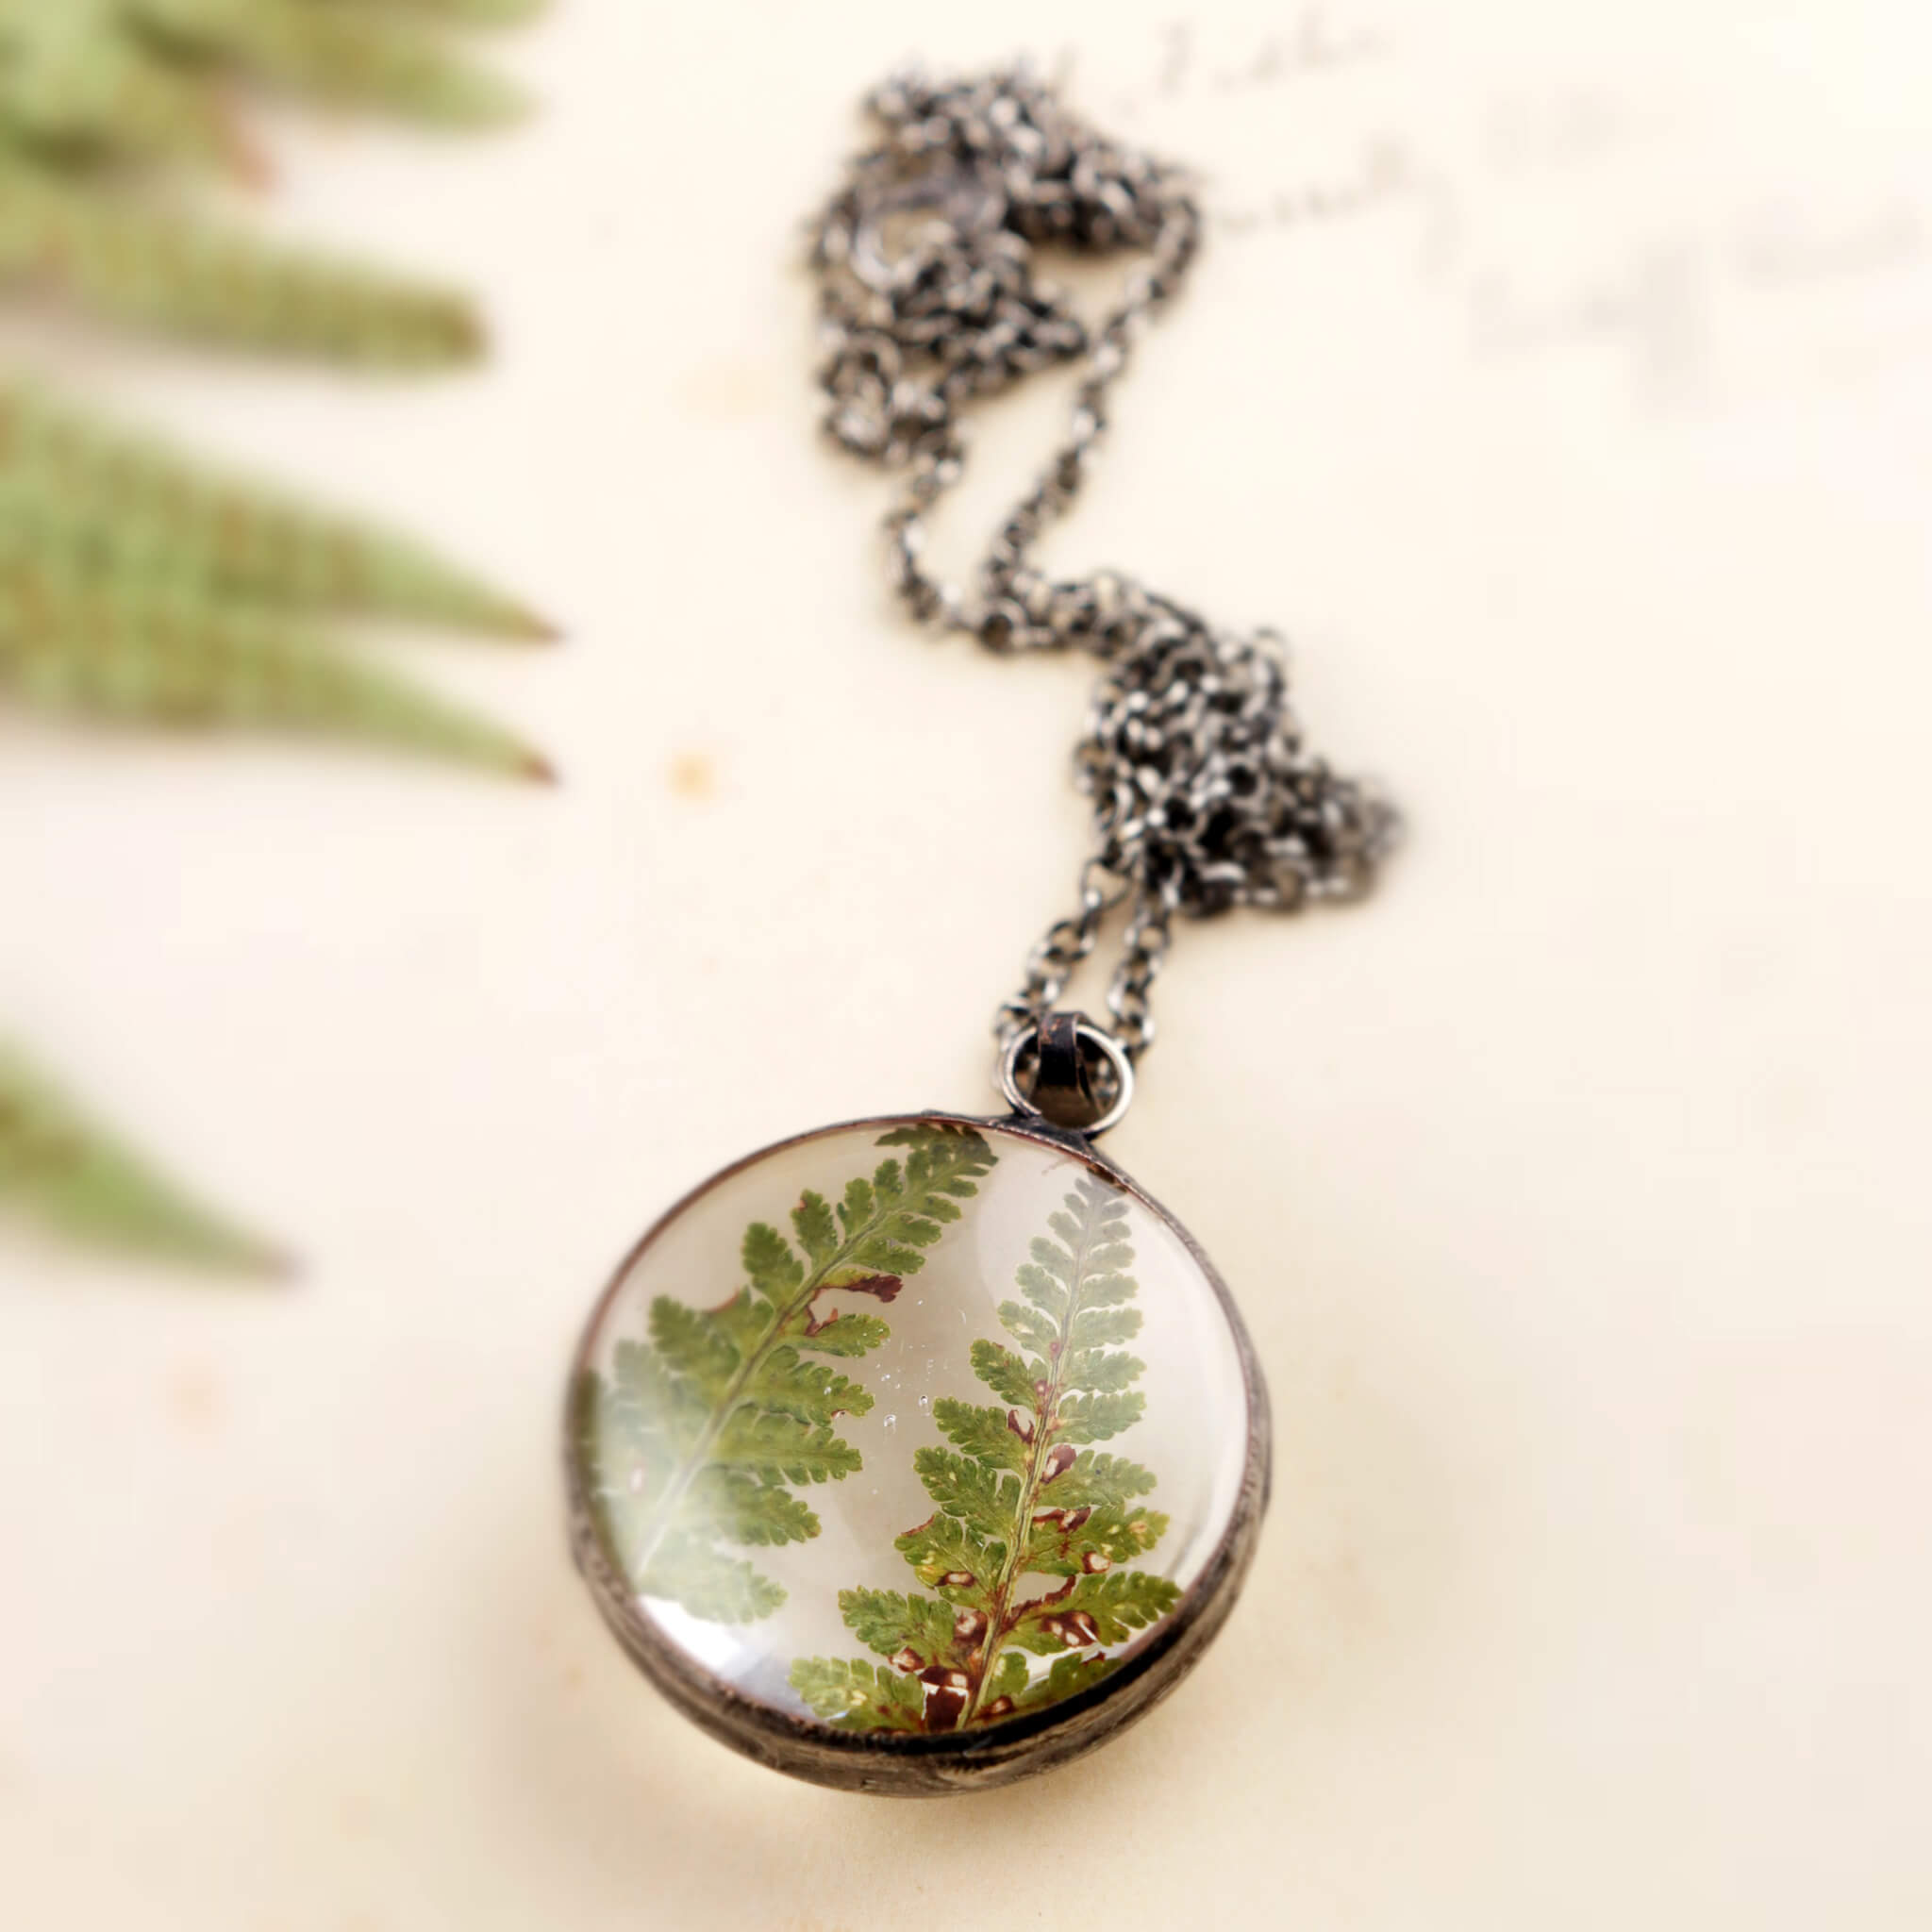 Round necklace with two dry ferns inside the magnifying glass